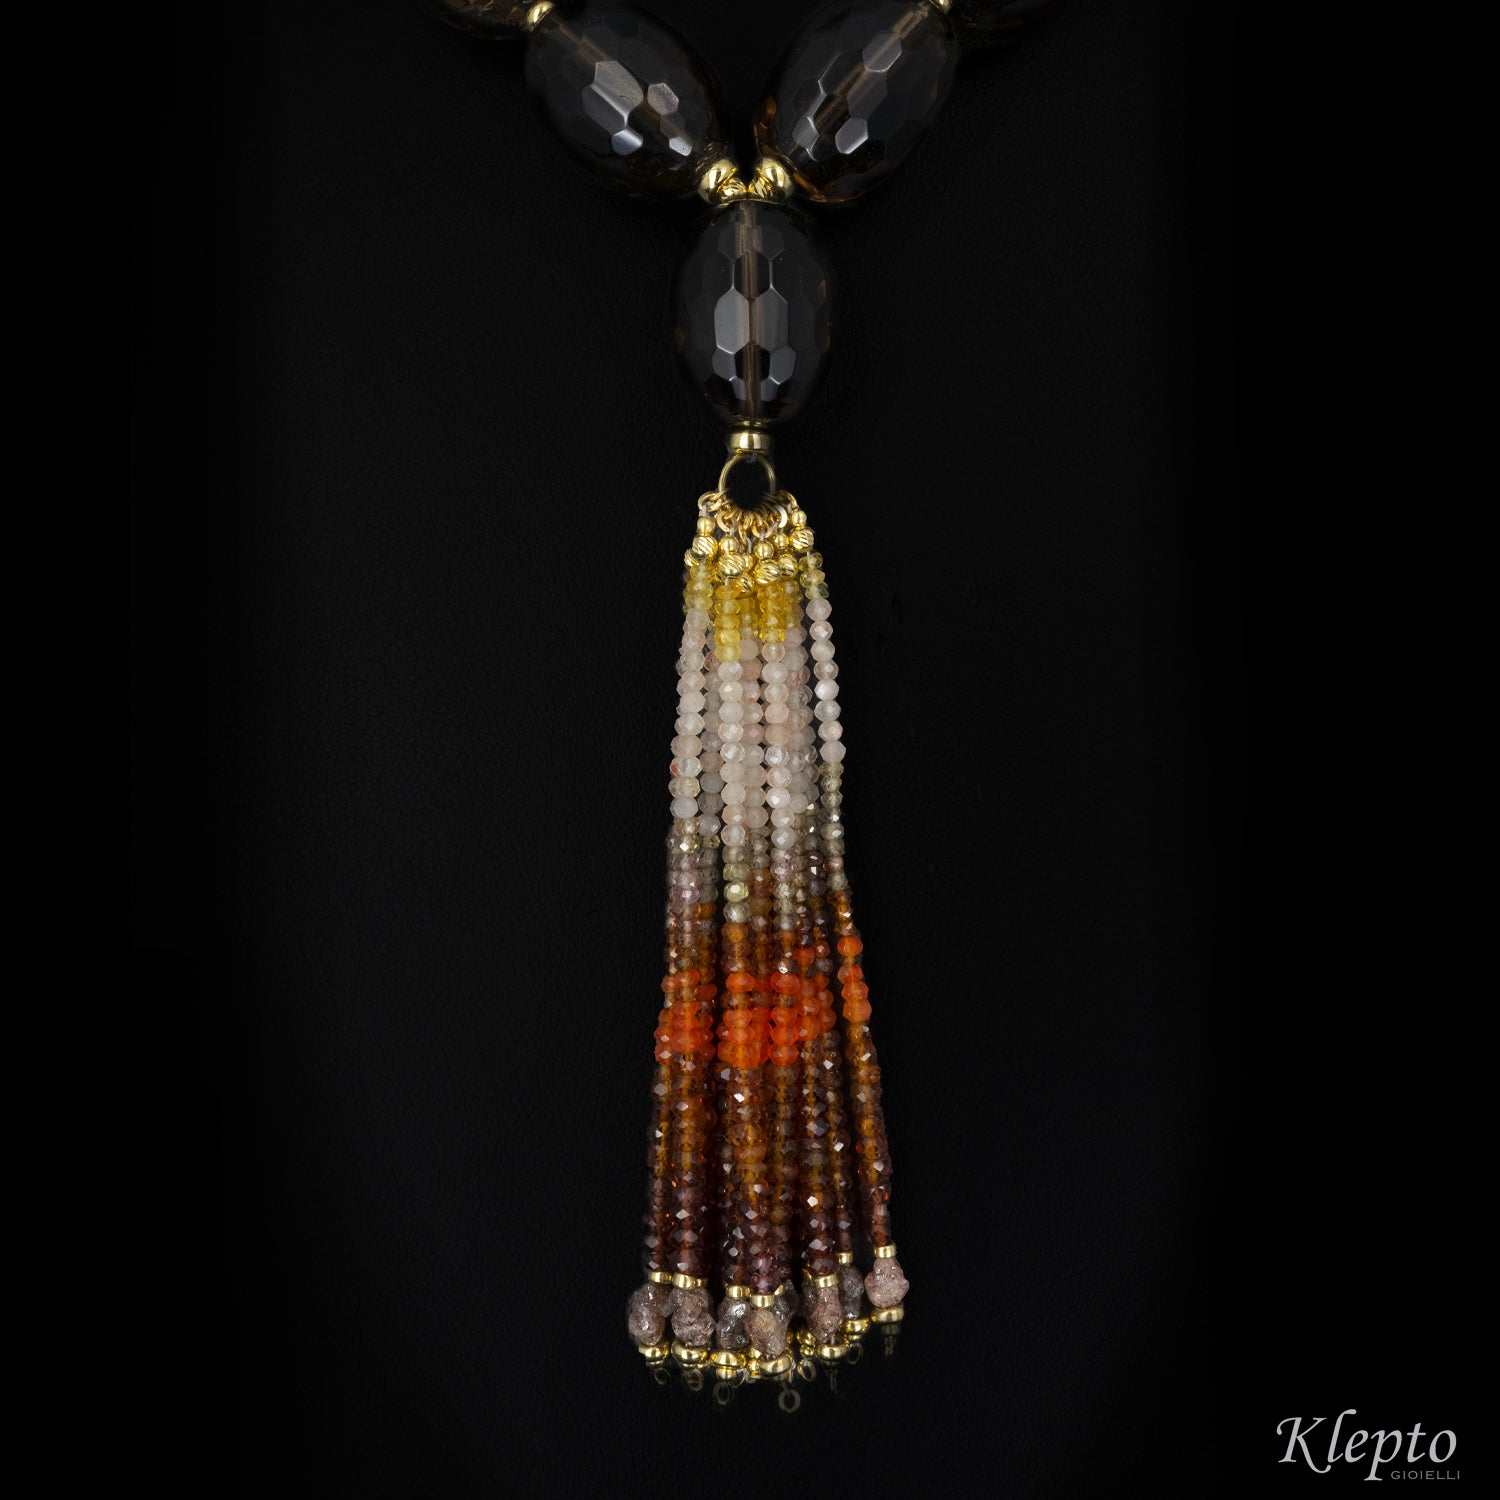 Nappa necklace in yellow gold with smoky quartz, garnet, agate and rough diamonds